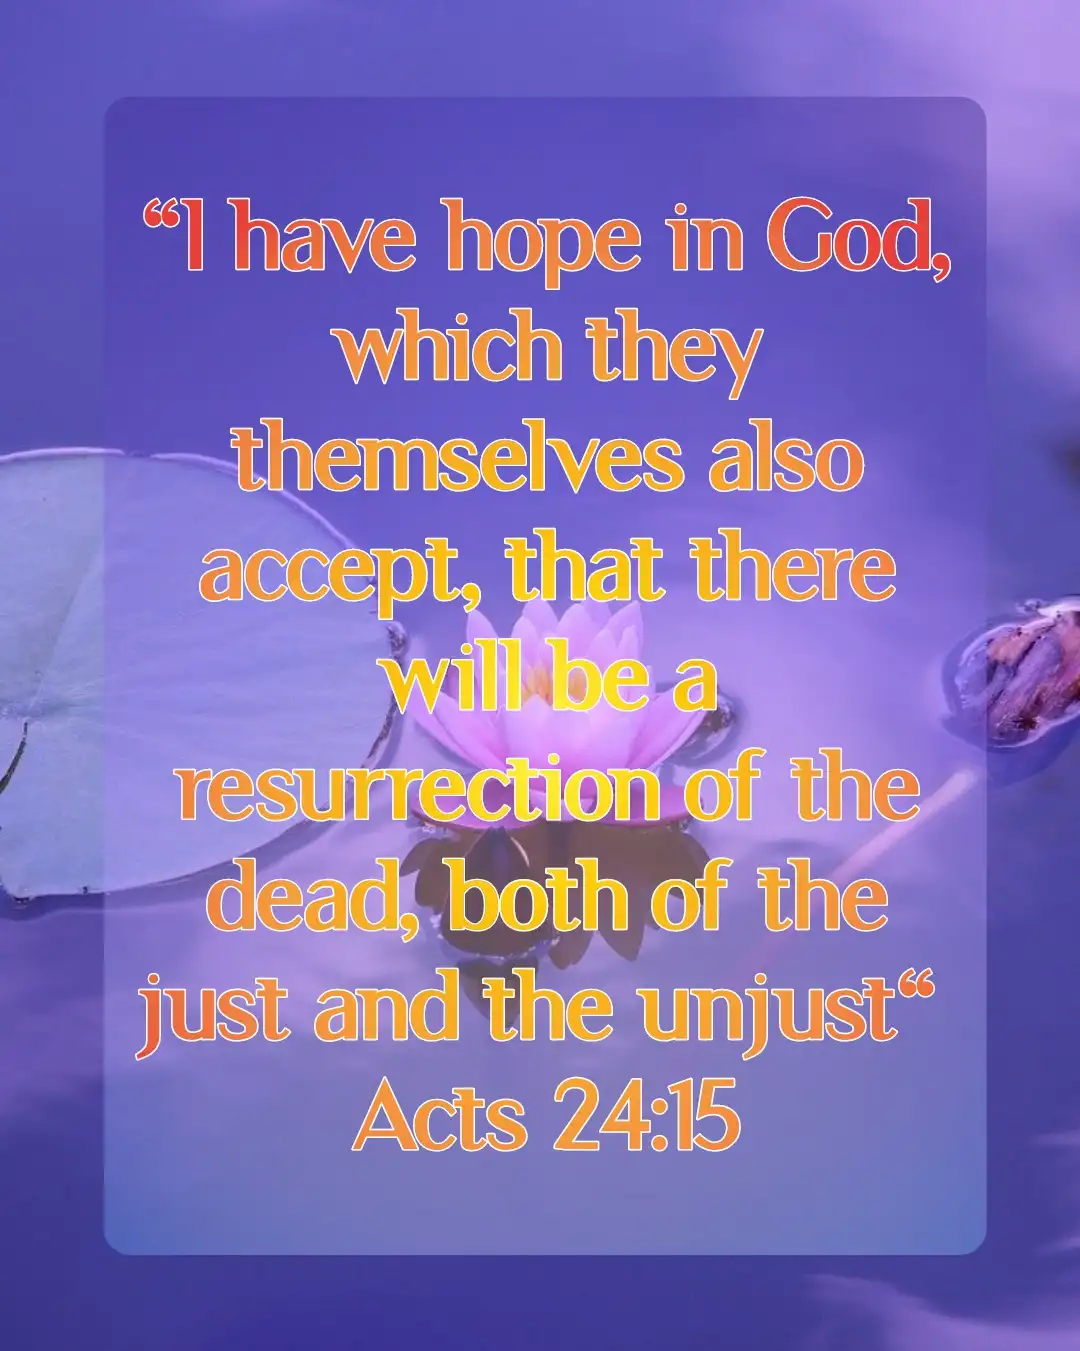 today Bible Verse(Acts 24:15)